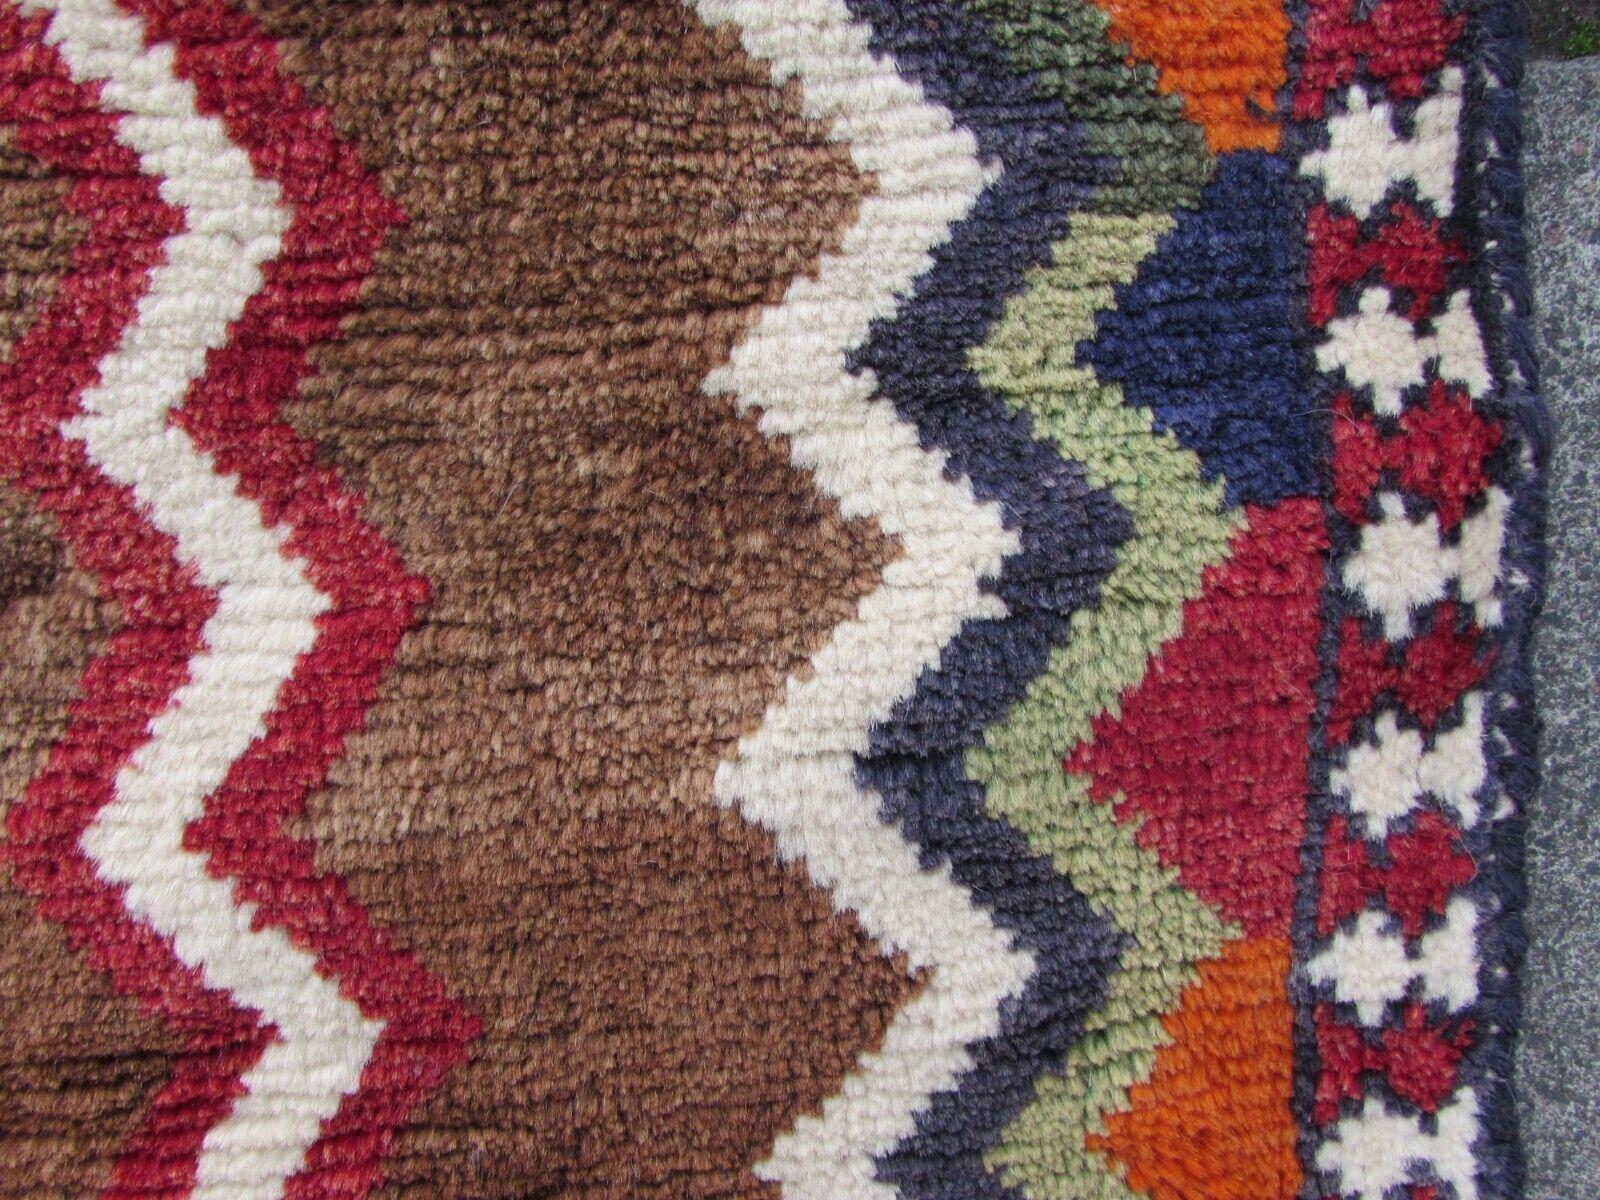 Late 20th Century Handmade Vintage Persian Style Gabbeh Rug 3.1' x 4.5', 1970s - 1Q70 For Sale